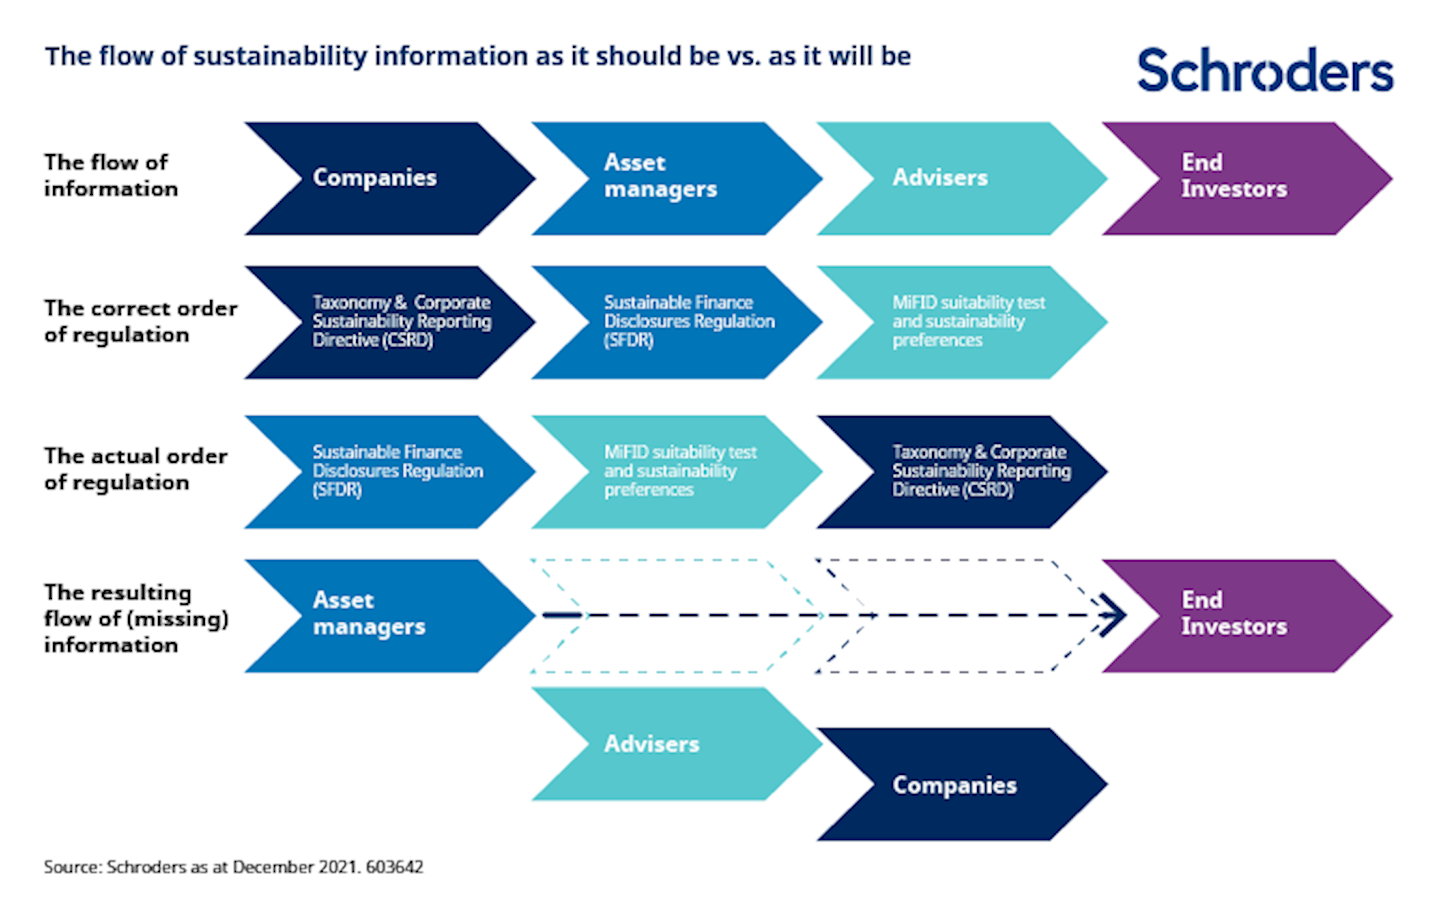 The flow of sustainability information as it should be vs as it will be